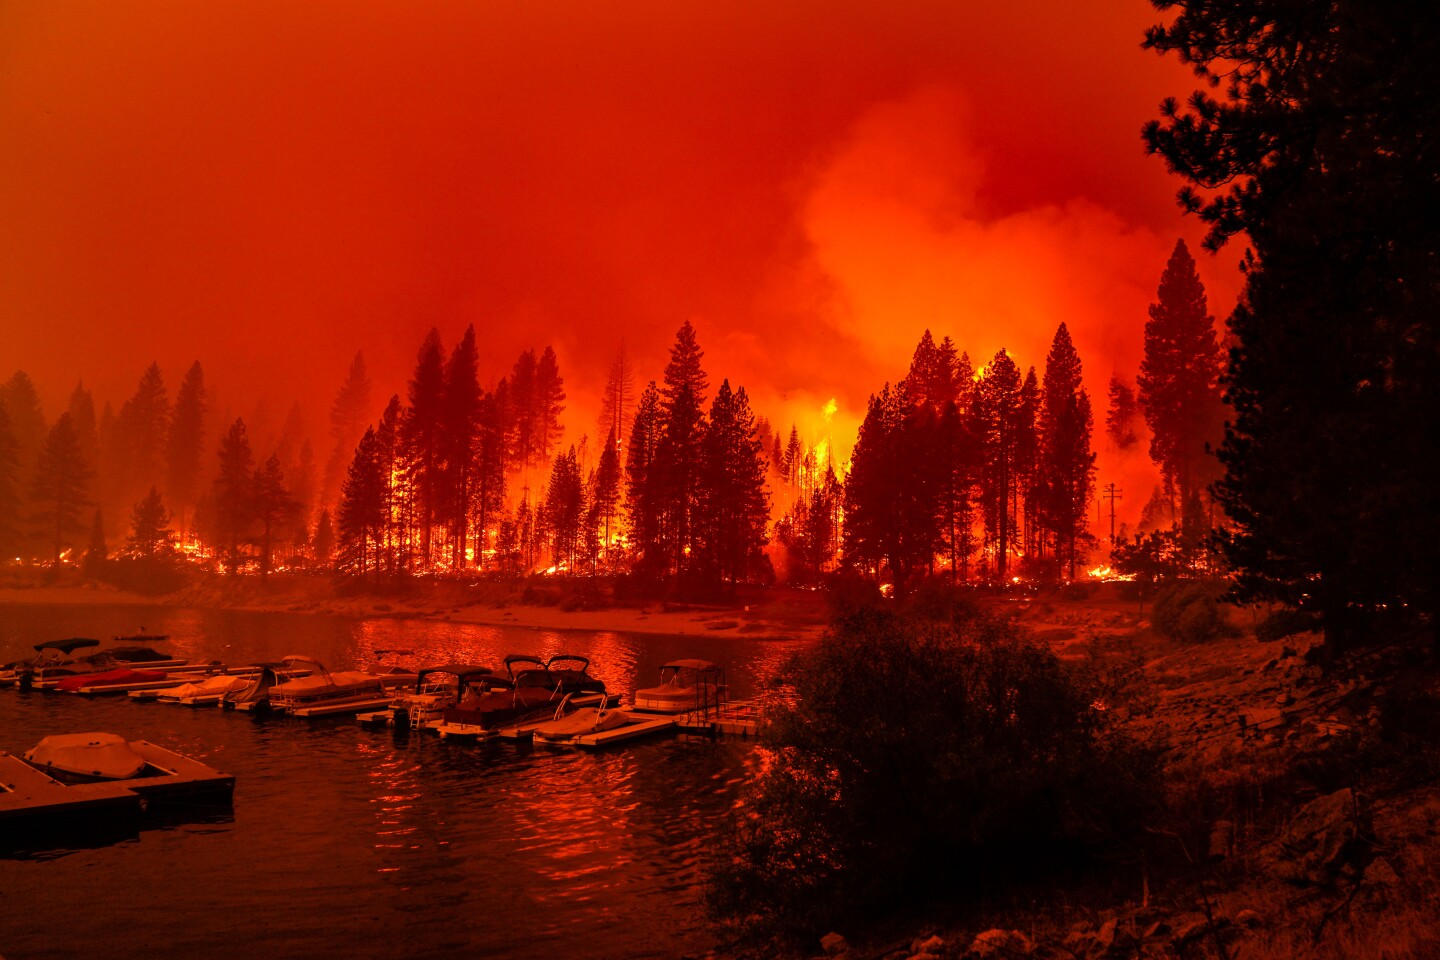 Fire in Northern California burns thousands of acres, forces